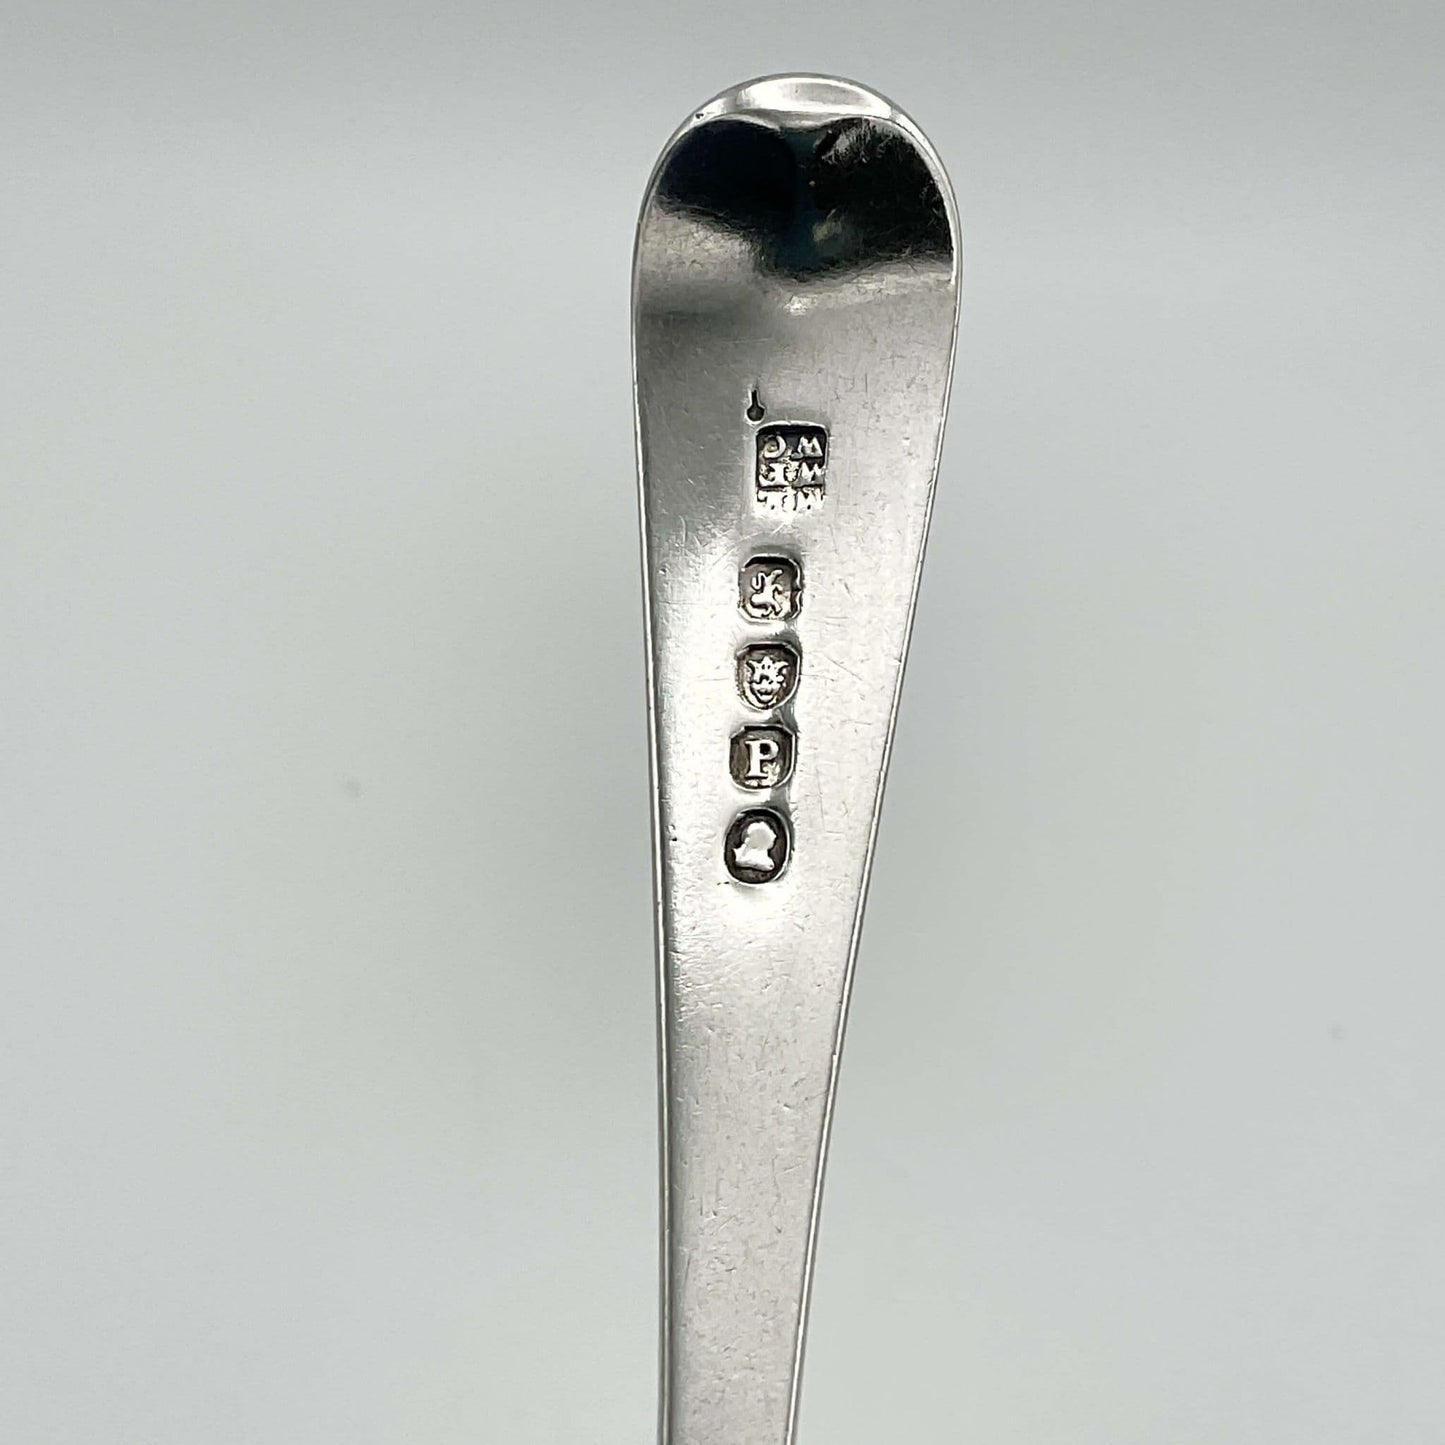 Georgian silver hallmarks for 1810 at top of handle